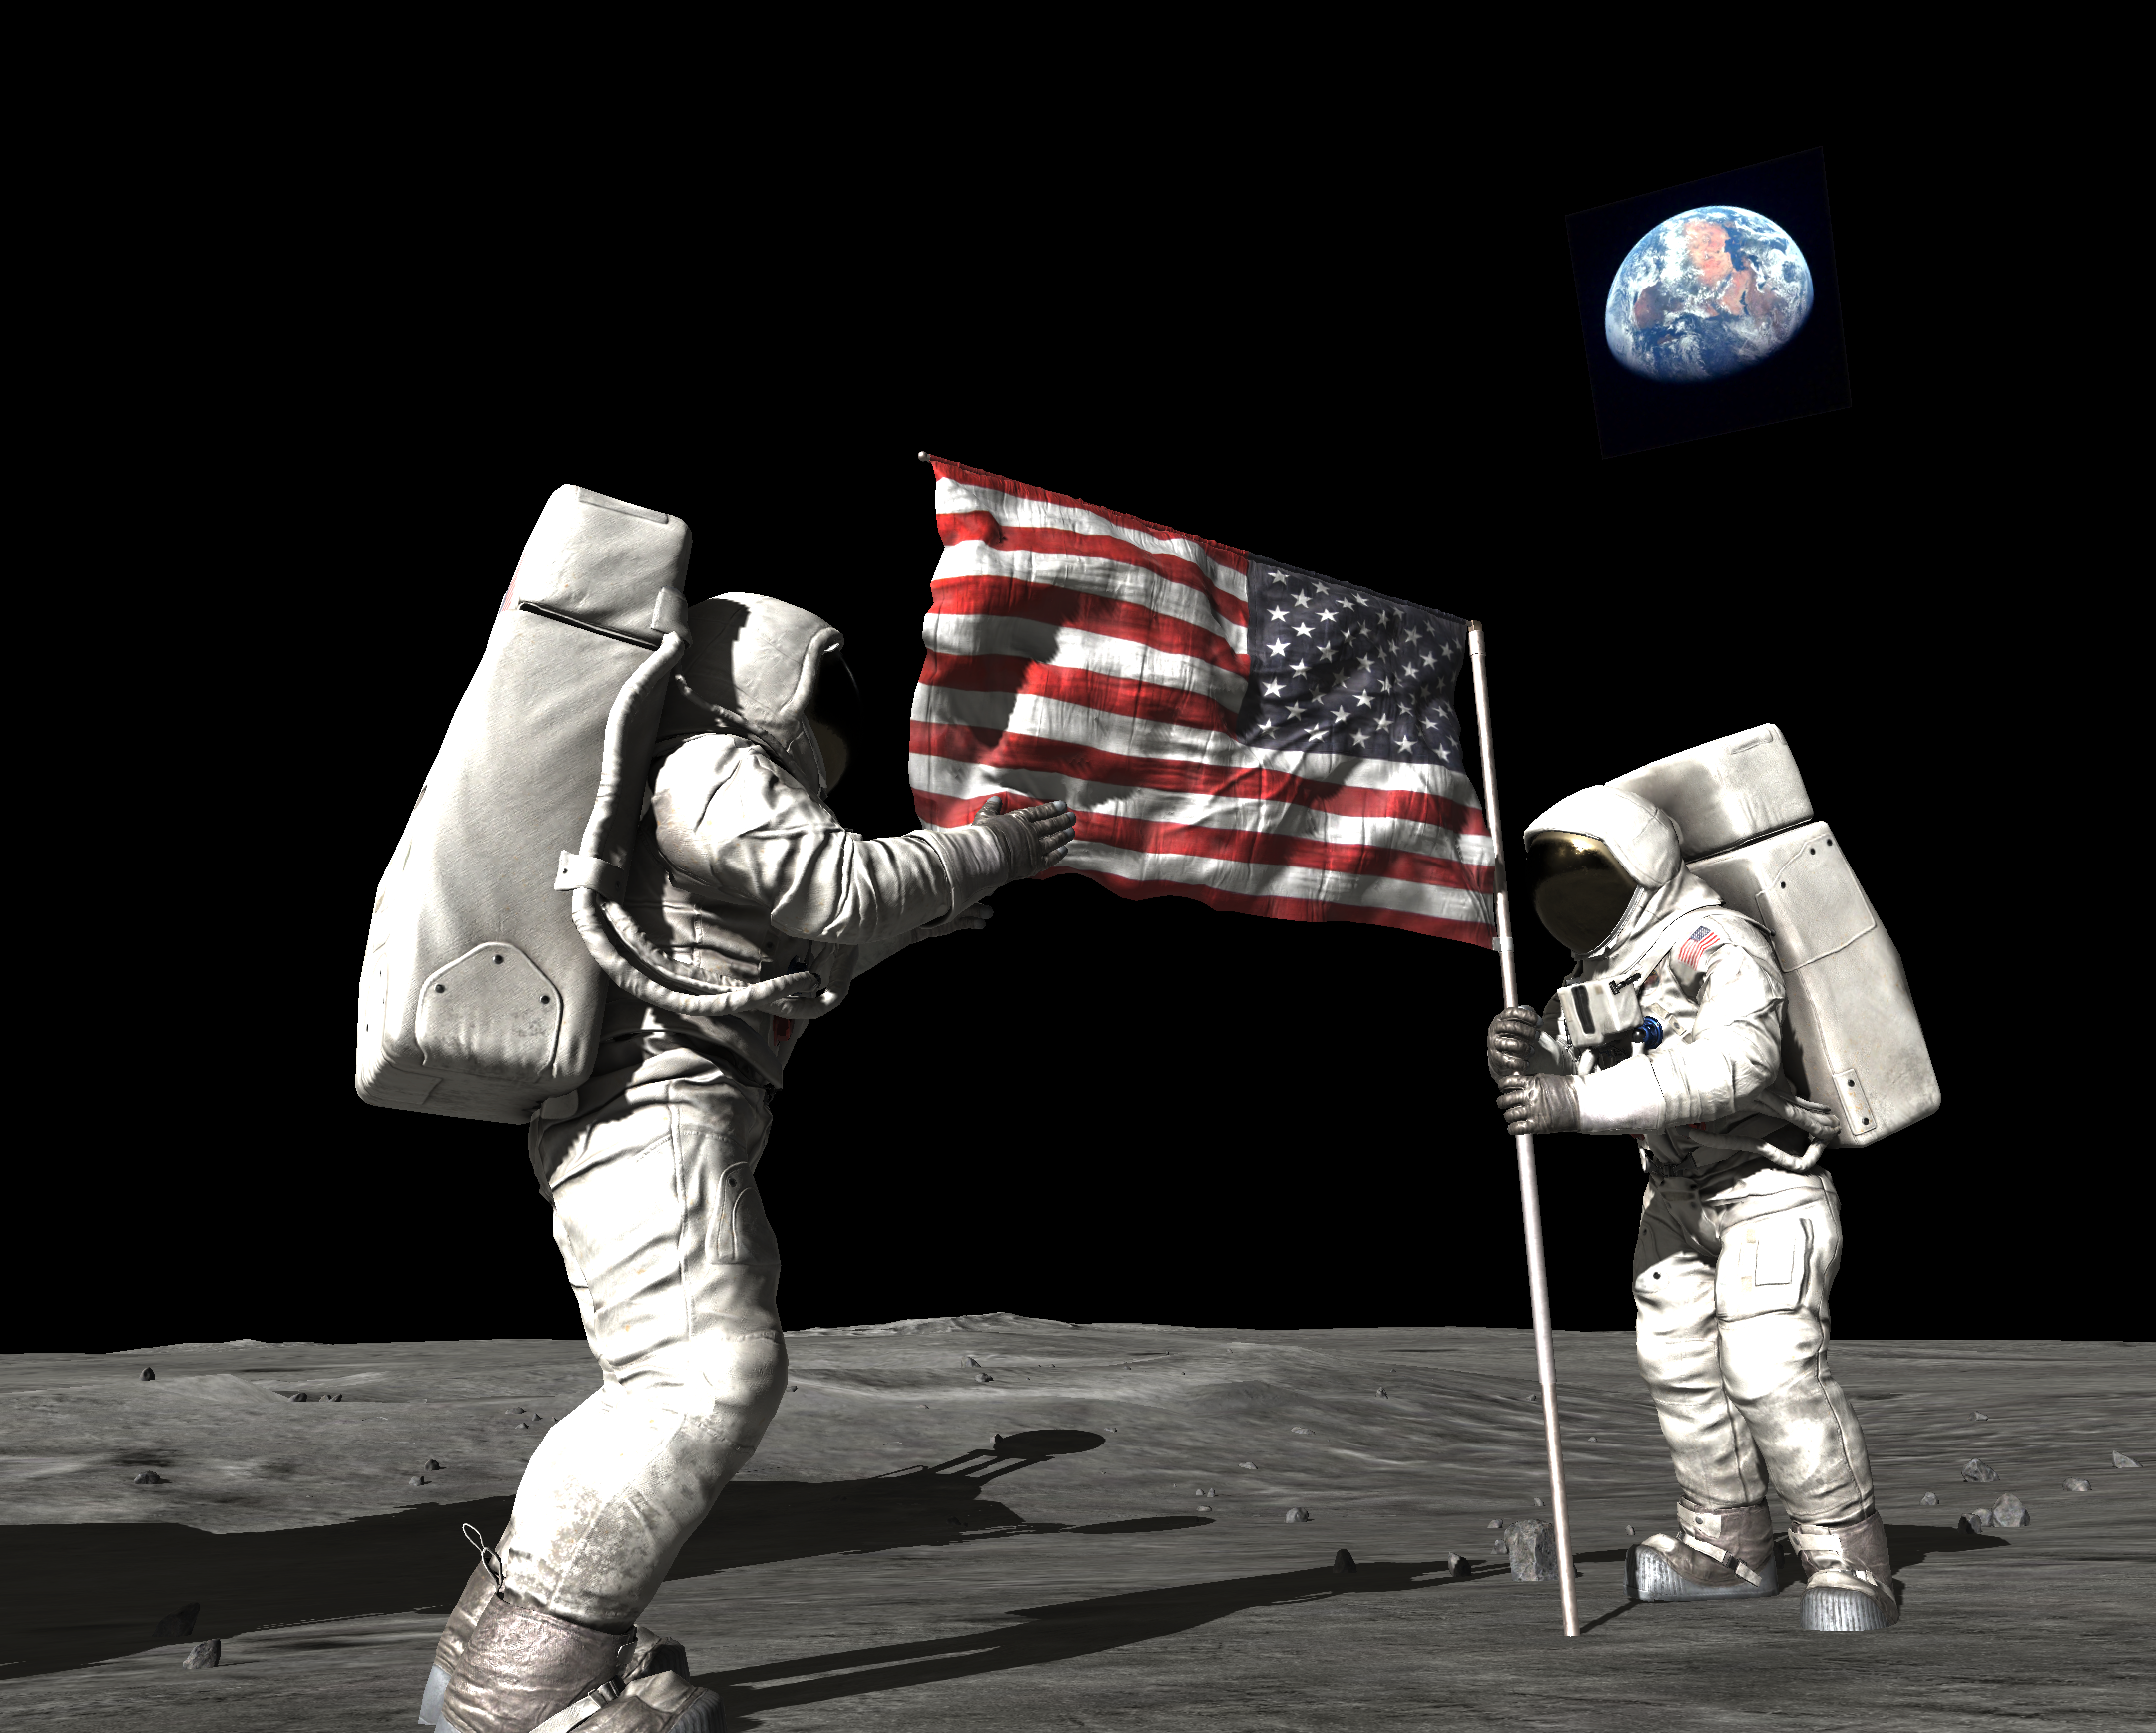 Smithsonian Channel Crafts Augmented Reality Game for Apollo Moon Landing Fans